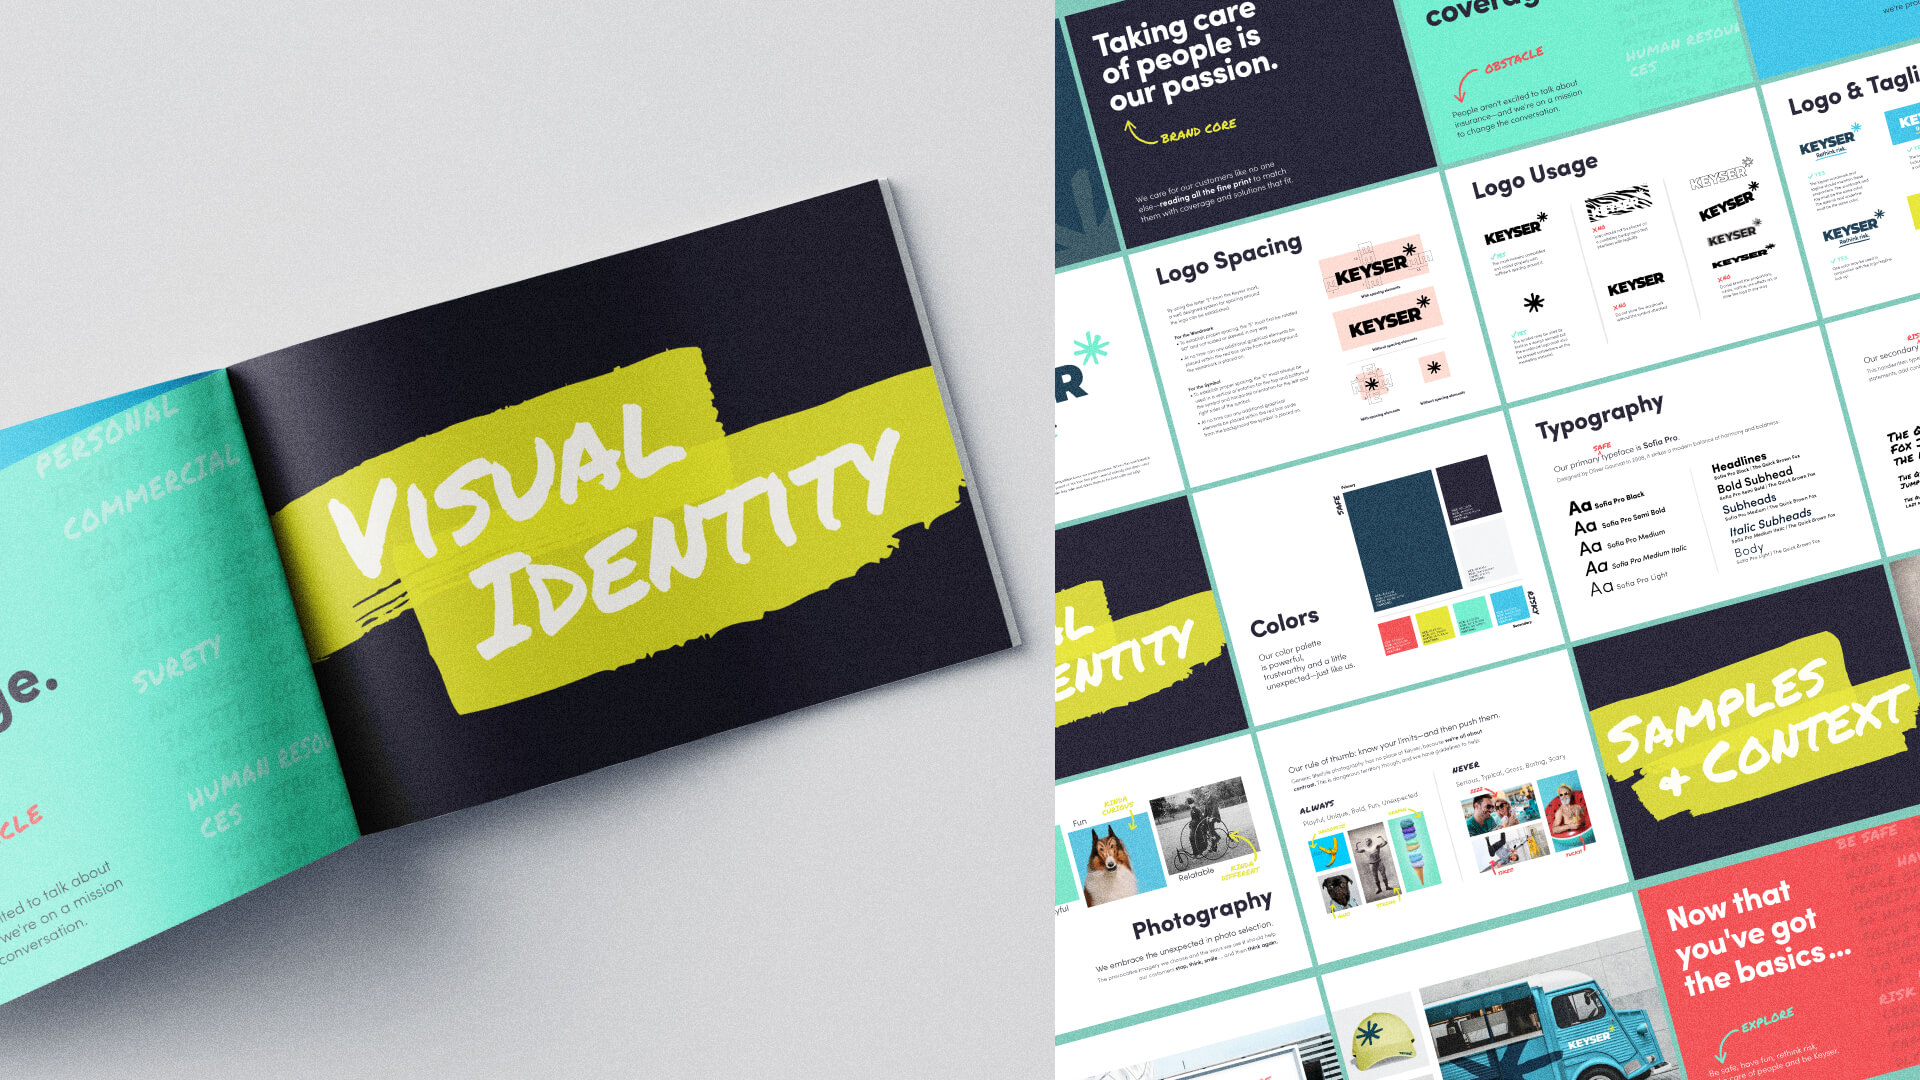 Collage of images showcasing the brand guide. The left image is an open pamphlet and the page says Visual Identity. The right image includes various pages from the brand guide.